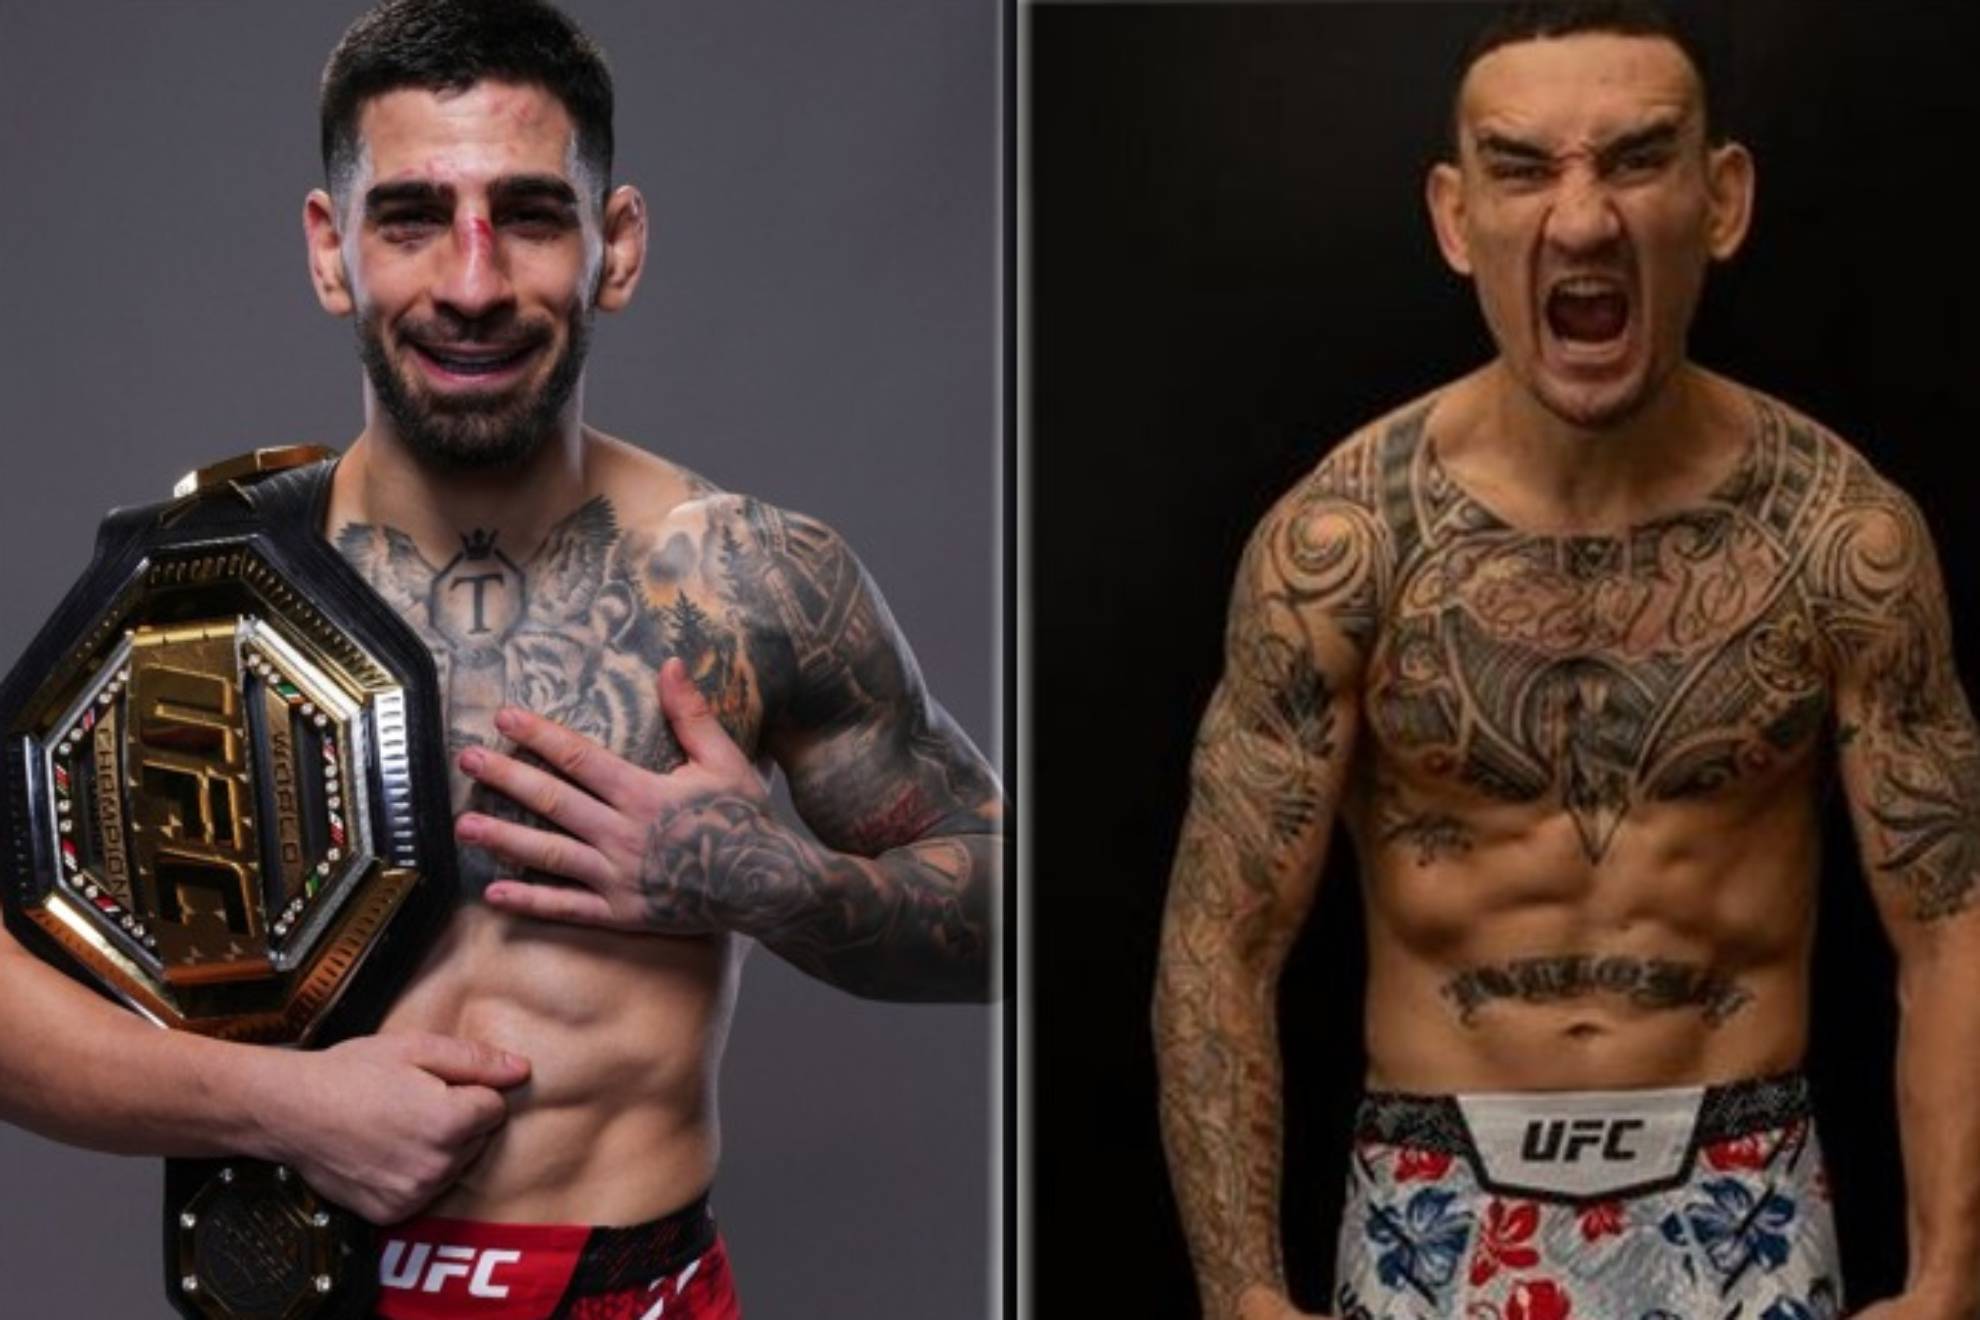 Ilia Topuria warns Max Holloway after agreeing to fight him